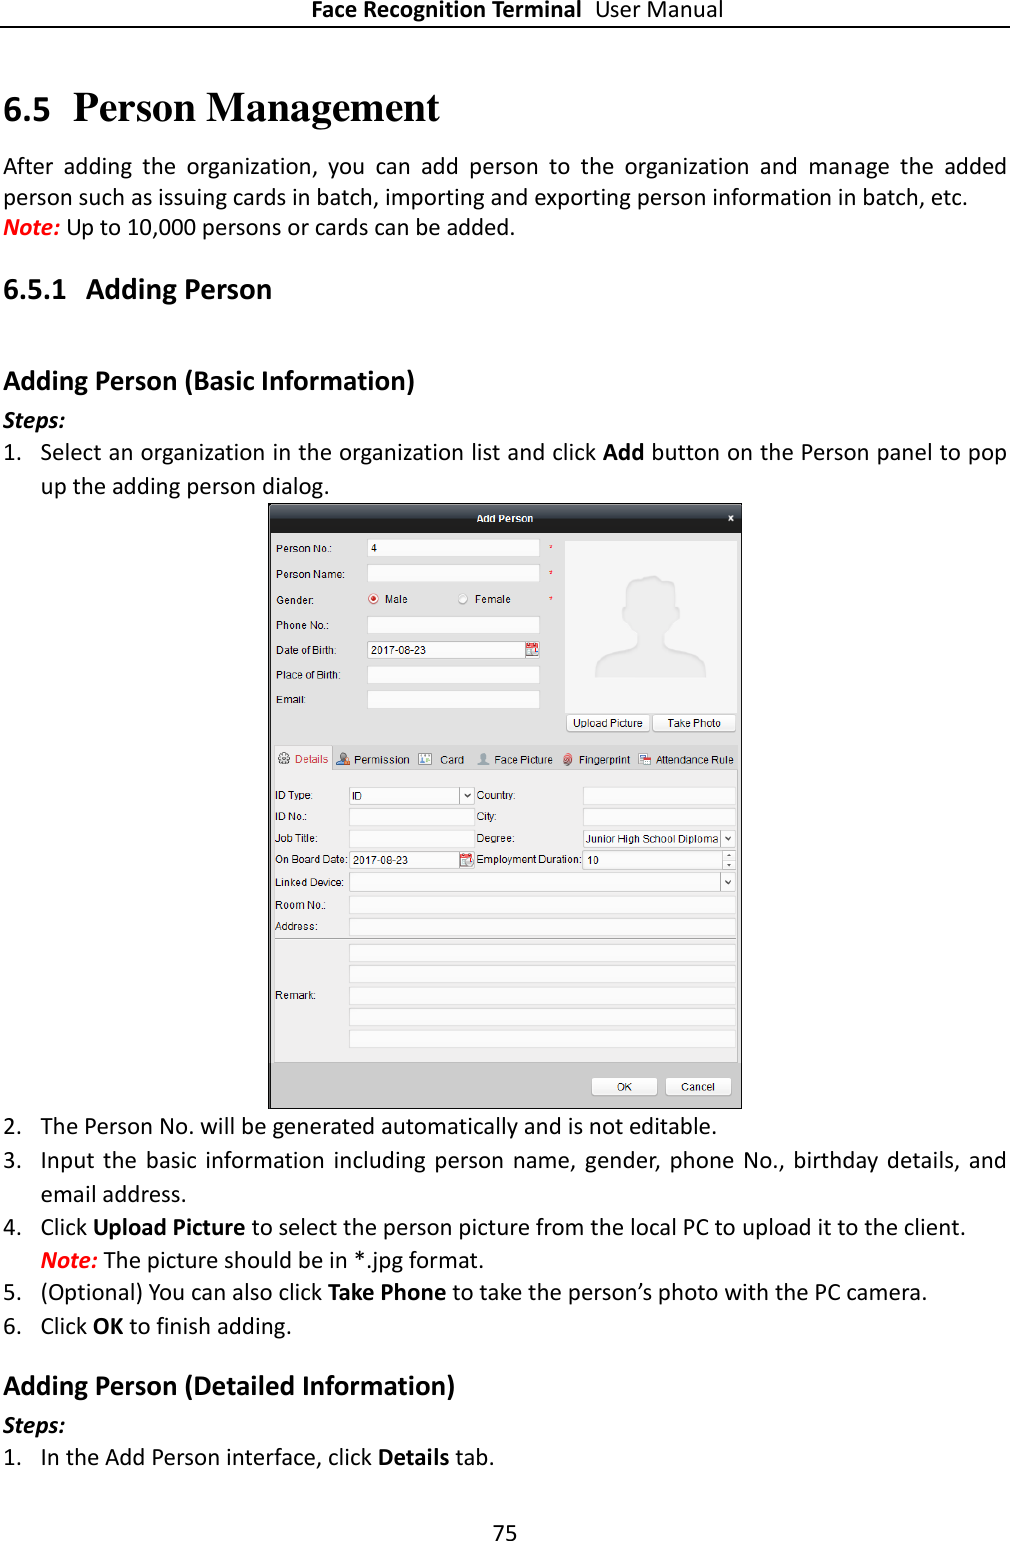 Face Recognition Terminal User Manual 75  6.5 Person Management After  adding  the  organization,  you  can  add  person  to  the  organization  and  manage  the  added person such as issuing cards in batch, importing and exporting person information in batch, etc. Note: Up to 10,000 persons or cards can be added.   6.5.1 Adding Person Adding Person (Basic Information)   Steps: 1. Select an organization in the organization list and click Add button on the Person panel to pop up the adding person dialog.  2. The Person No. will be generated automatically and is not editable. 3. Input  the  basic  information  including  person name,  gender,  phone  No.,  birthday details, and email address.   4. Click Upload Picture to select the person picture from the local PC to upload it to the client. Note: The picture should be in *.jpg format. 5. (Optional) You can also click Take Phone to take the person’s photo with the PC camera. 6. Click OK to finish adding. Adding Person (Detailed Information) Steps: 1. In the Add Person interface, click Details tab. 